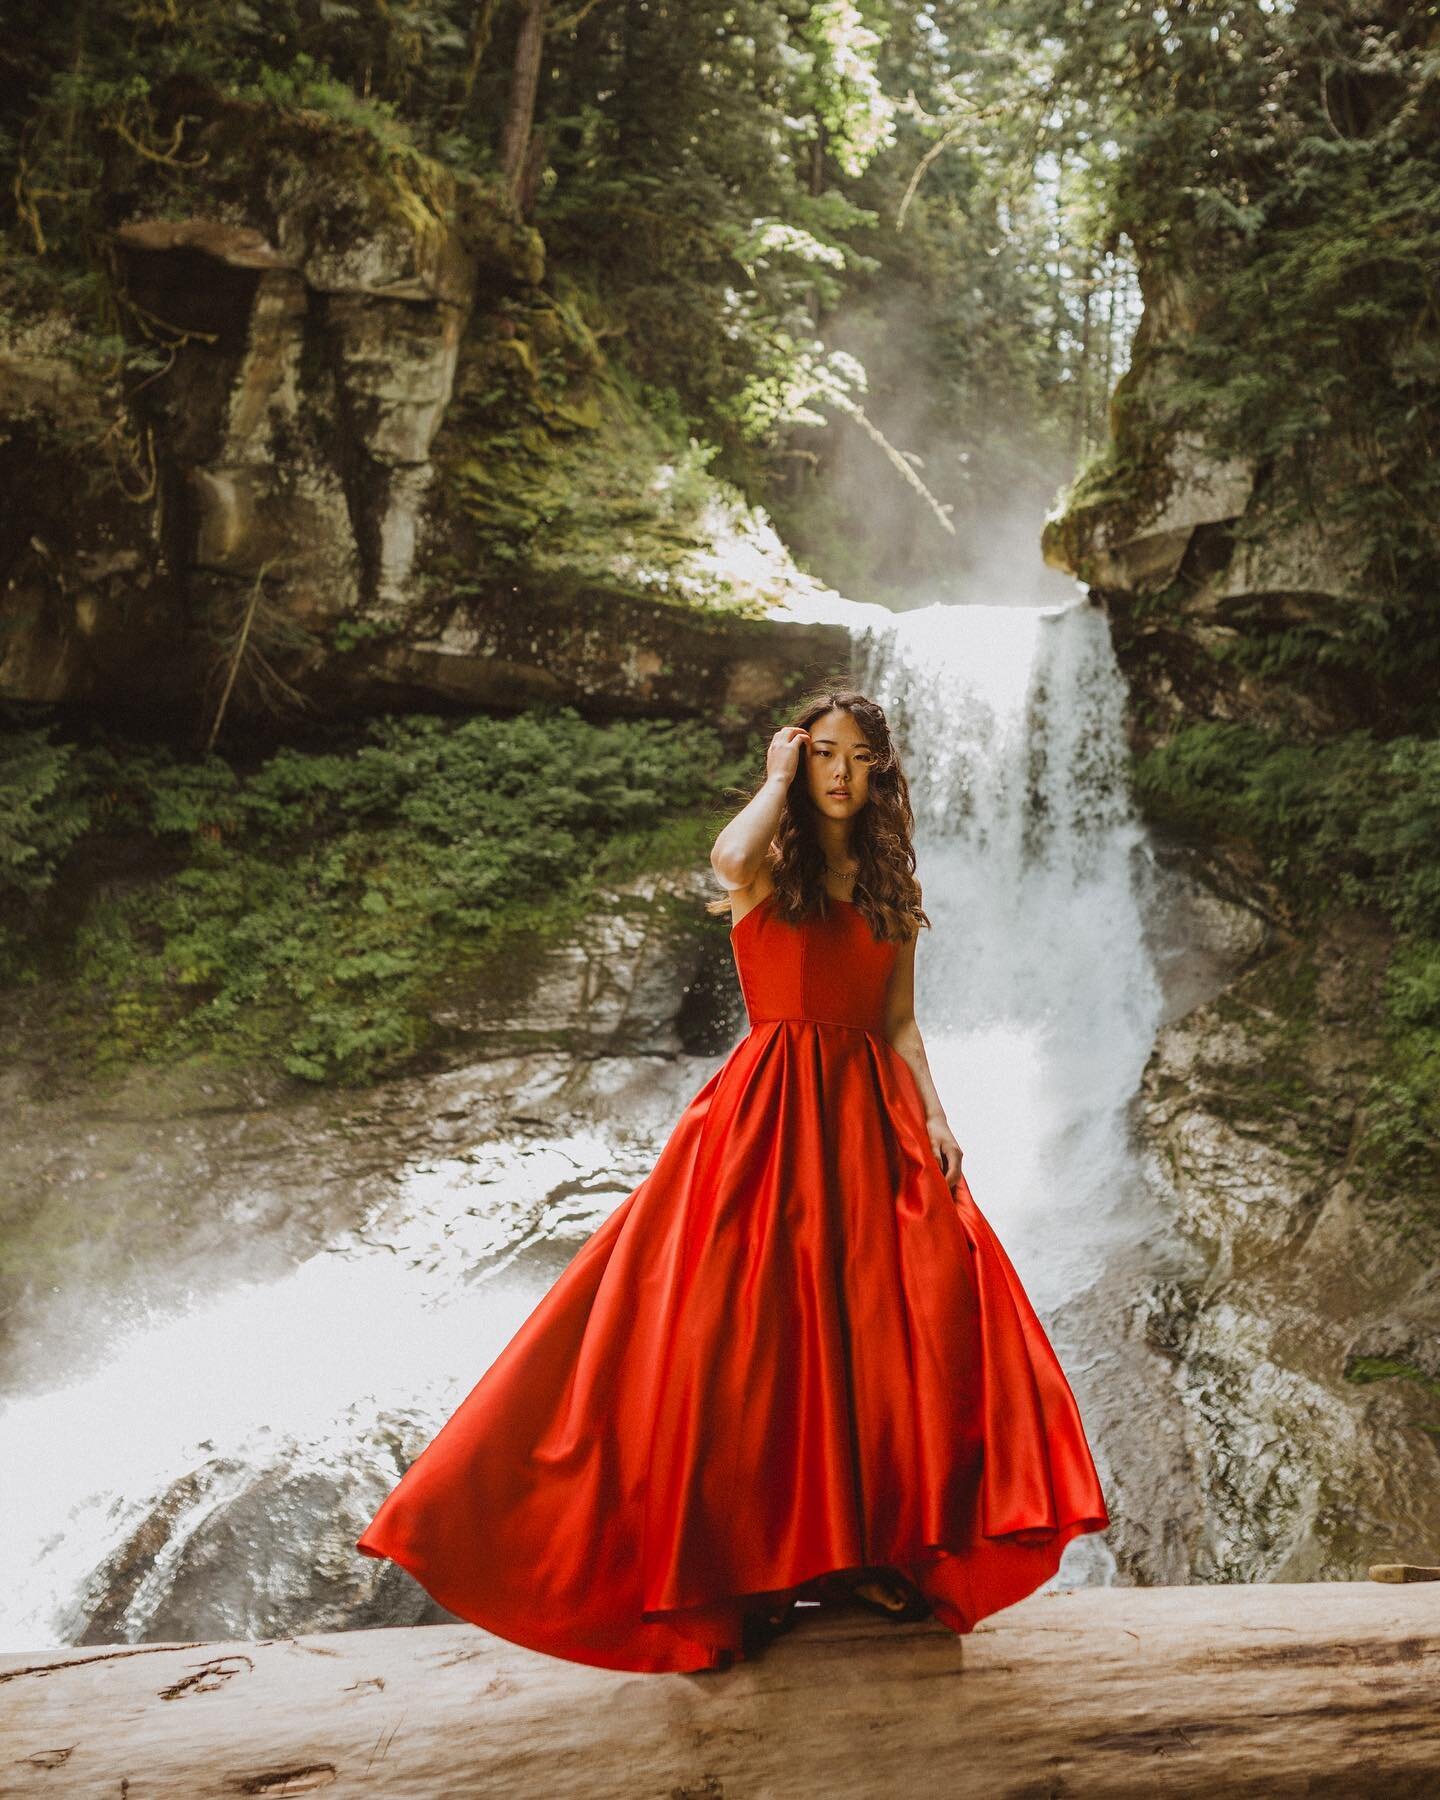 I meannn why not hike to a waterfall and put on your fanciest of fancy clothes!? // this fun little adventure ft. a fairly large waterfall with @elleigh.j.smith + @kyle.w.millican is now up on the blog (link in bio)
⠀⠀⠀⠀⠀⠀⠀⠀⠀
#bellinghamphotographer 